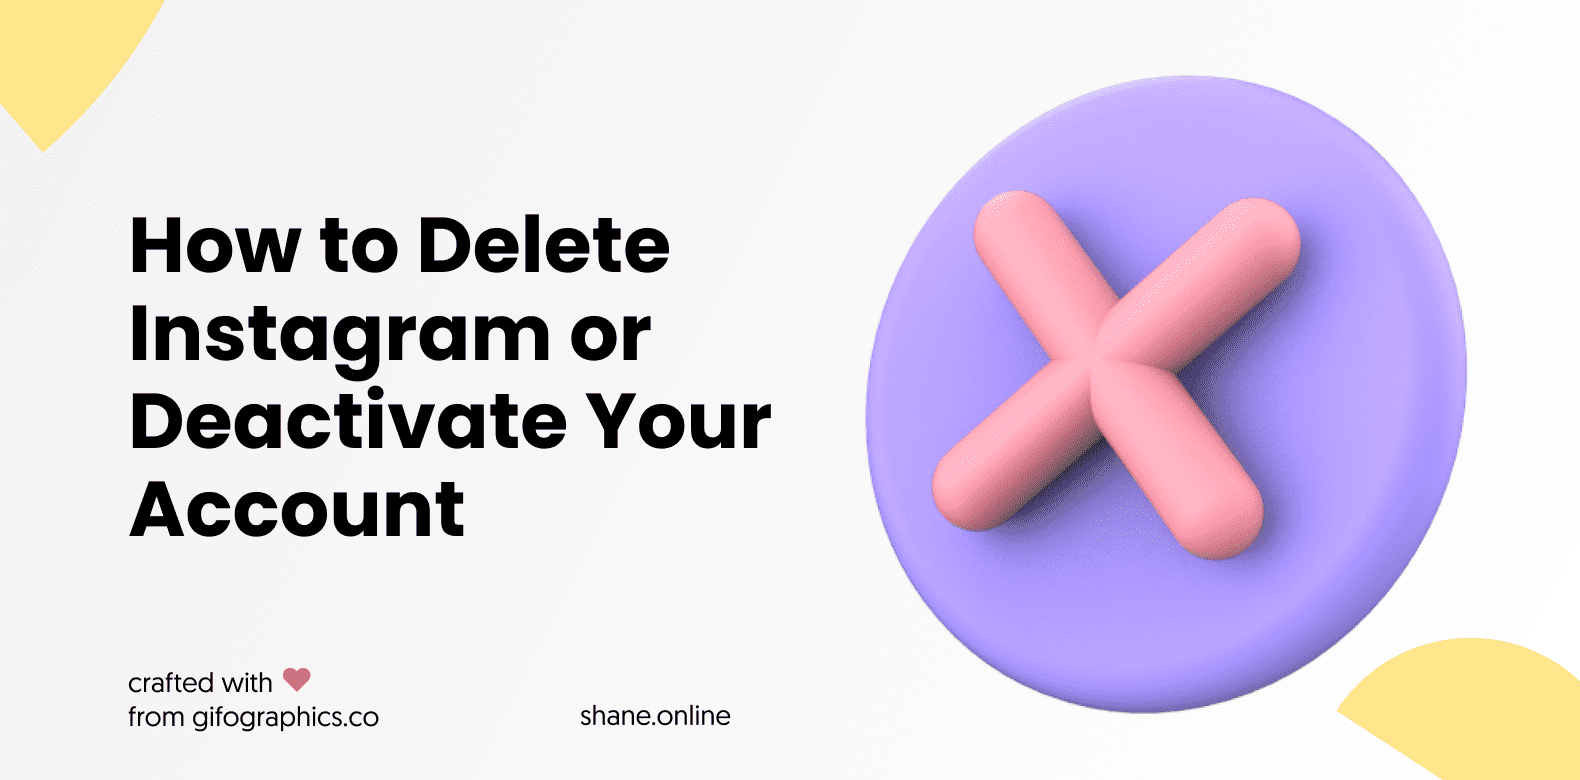 How to Delete Instagram or Deactivate Your Account